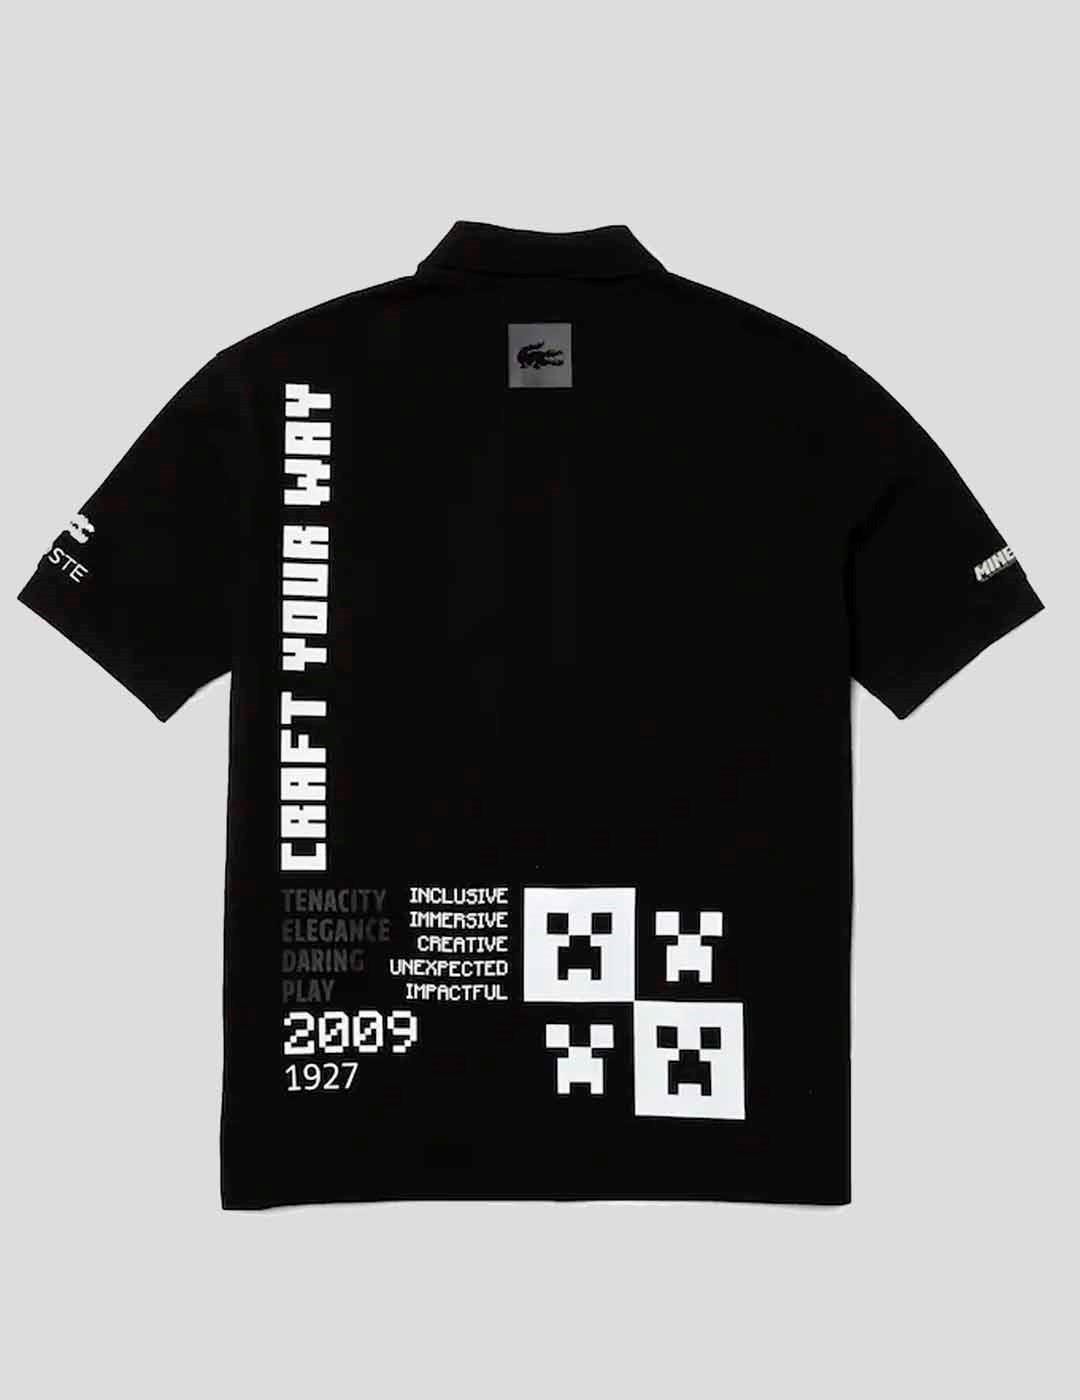 CAMISETA LACOSTE X MINECRAFT RELAXED FIT POLO BLACK